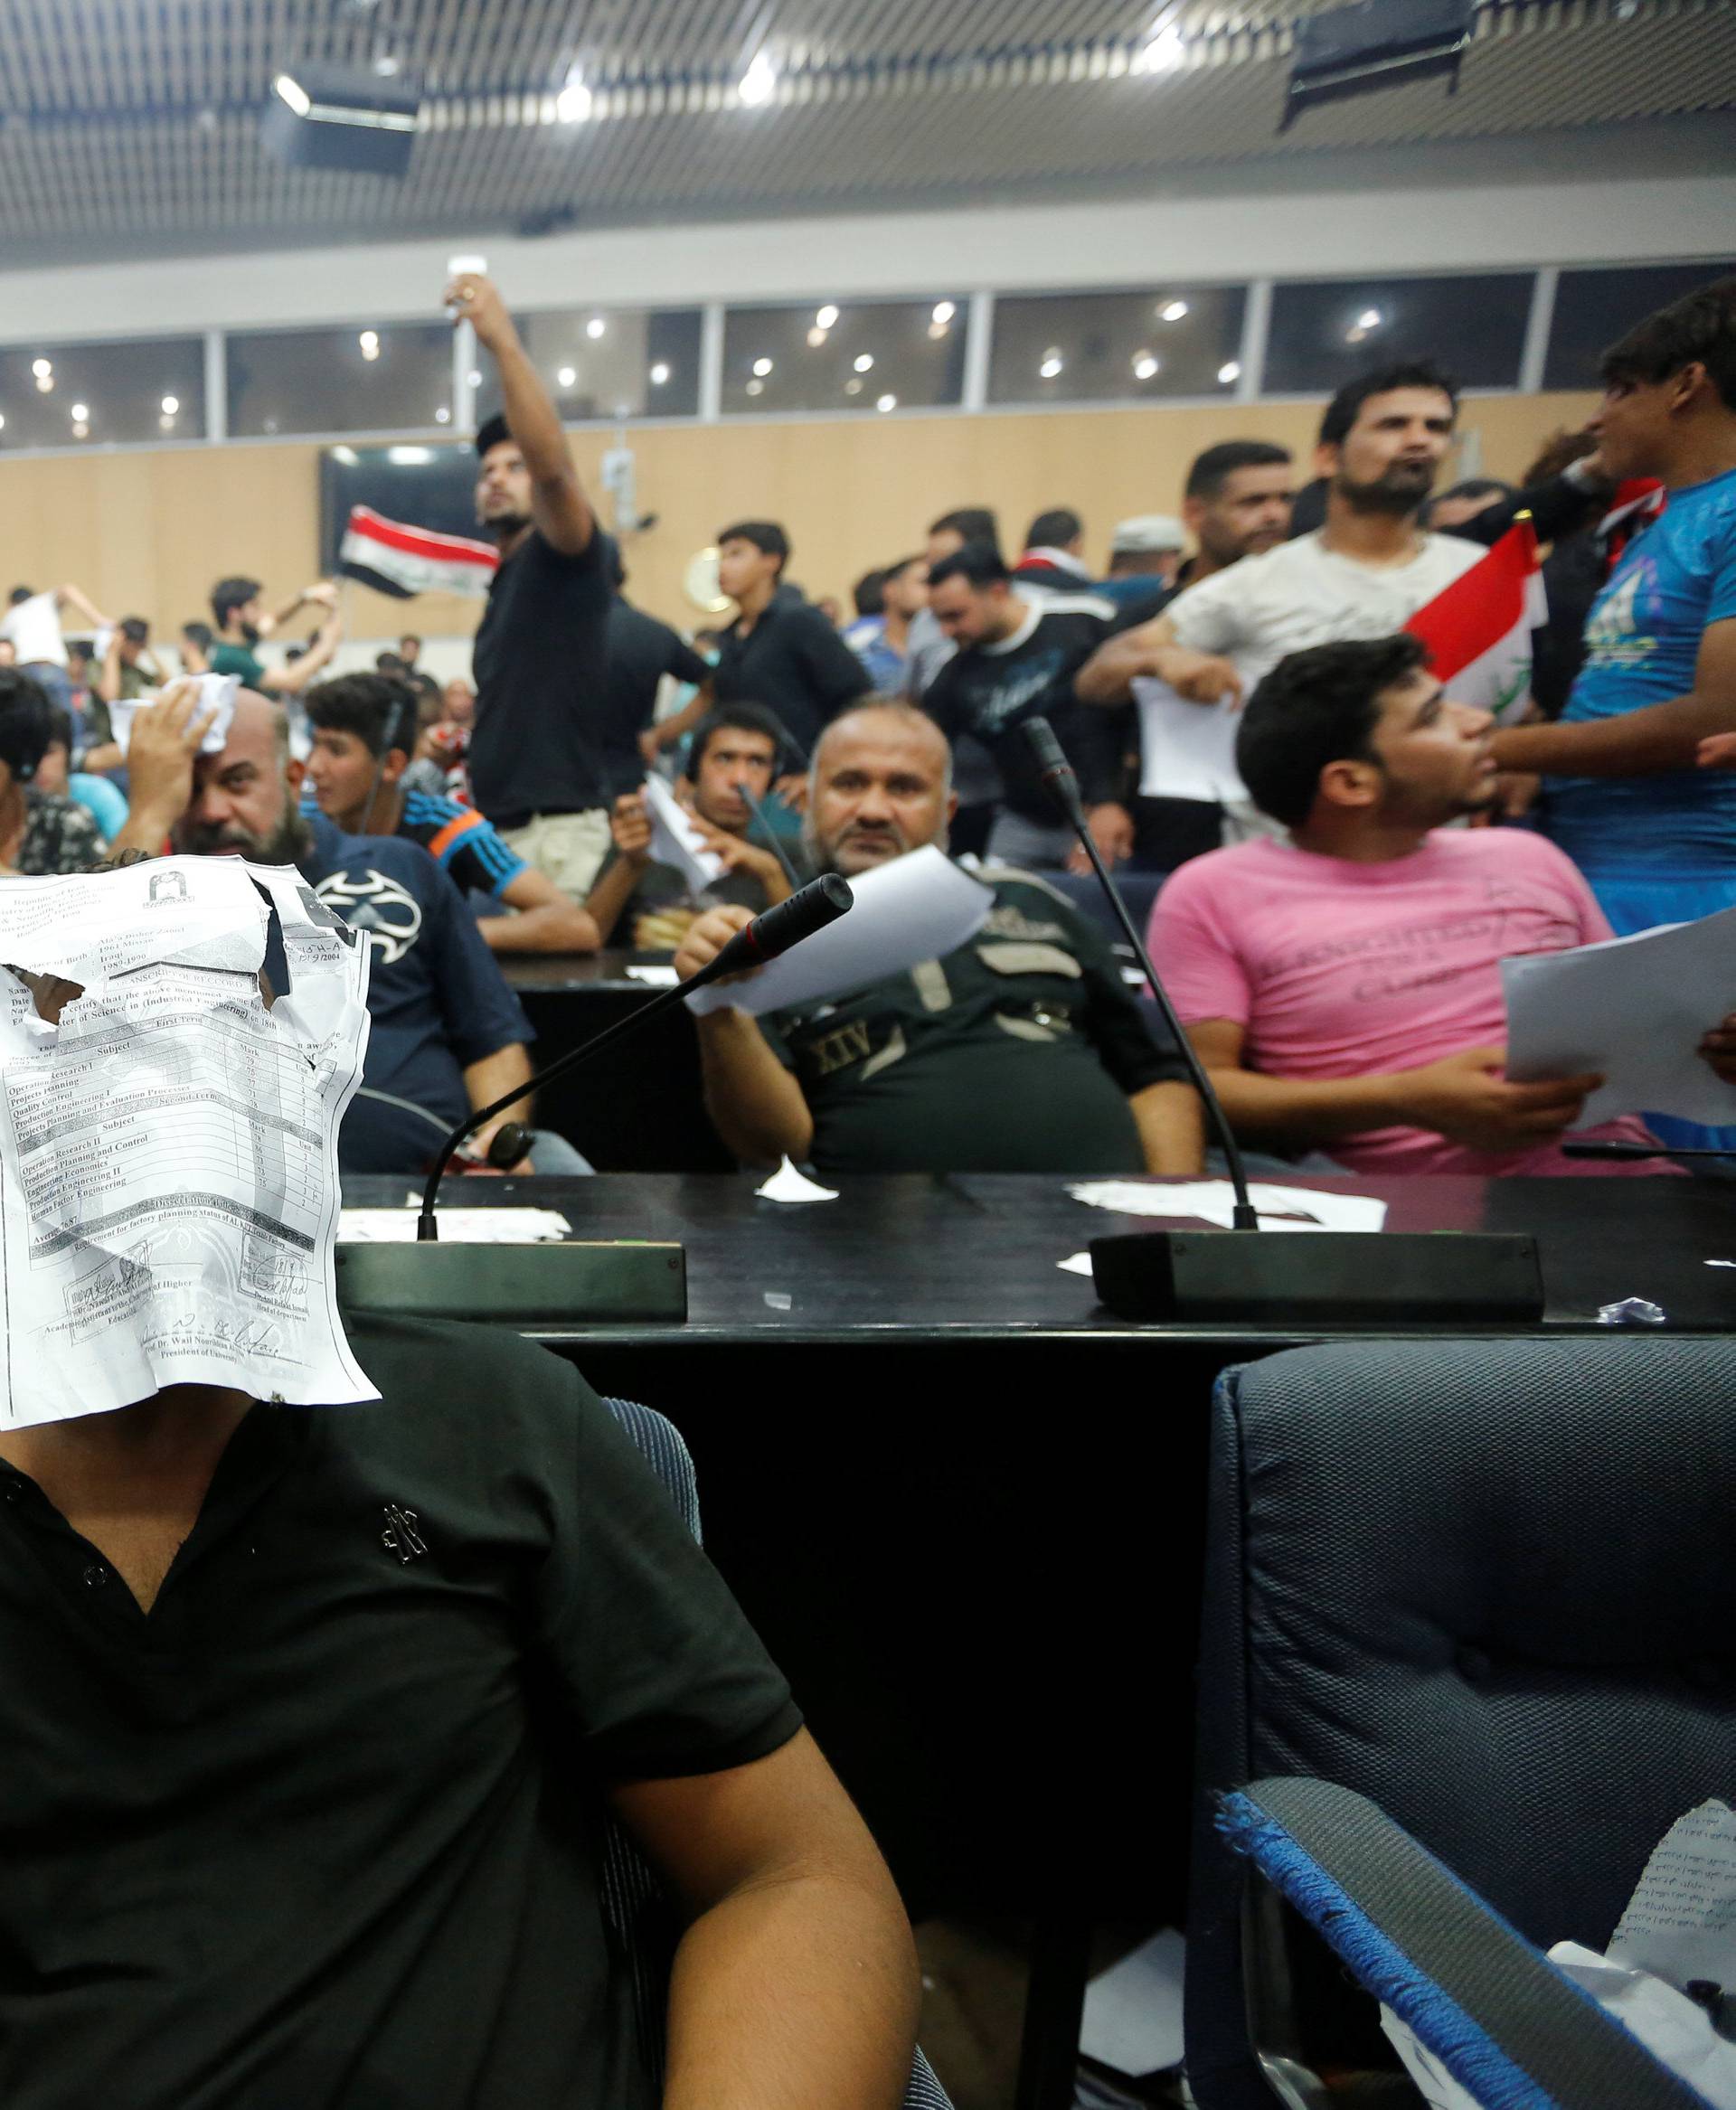 Followers of Iraq's Shi'ite cleric Moqtada al-Sadr are seen in the parliament building as they storm Baghdad's Green Zone after lawmakers failed to convene for a vote on overhauling the government, in Iraq